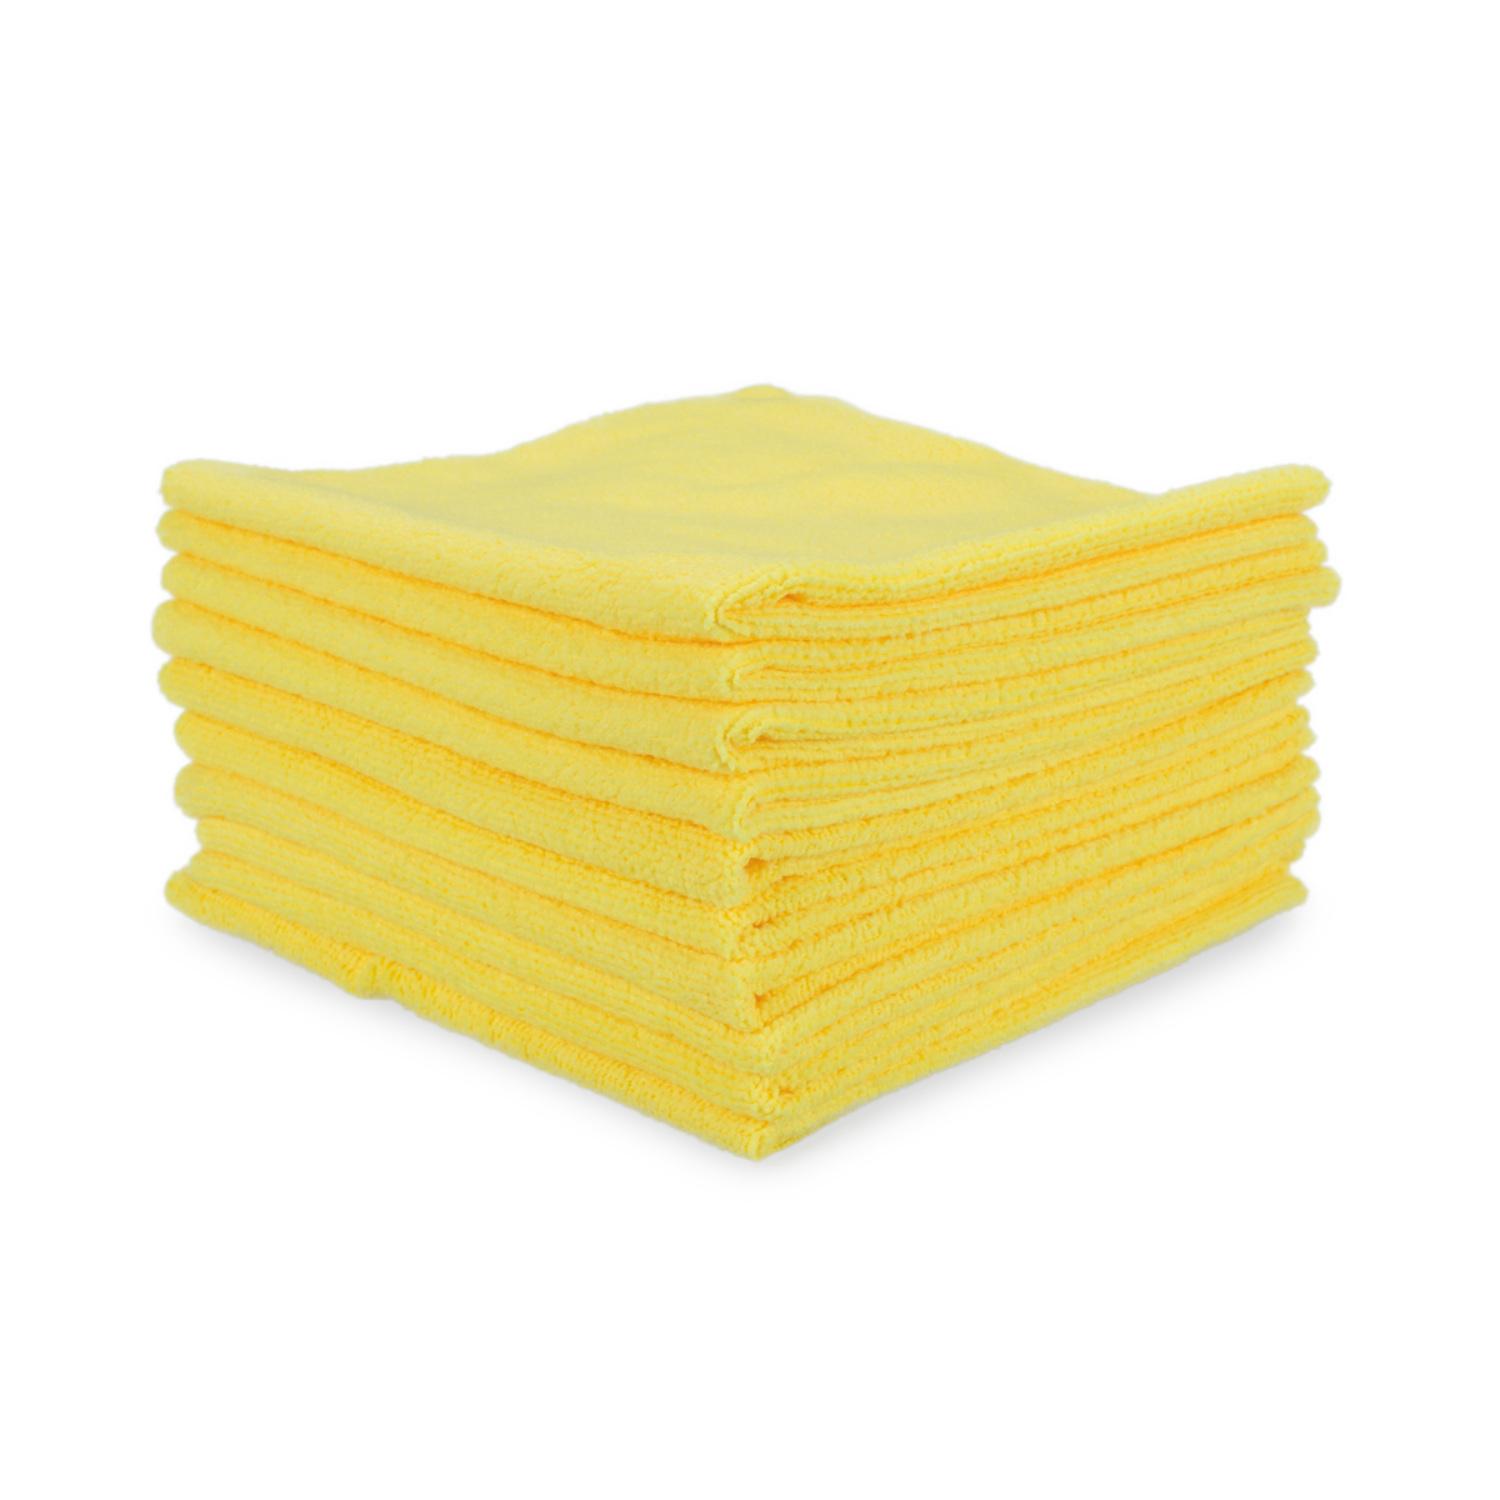 EDGELESS 245 ALL-PURPOSE TERRY TOWEL: 16 X 16 (Pack)